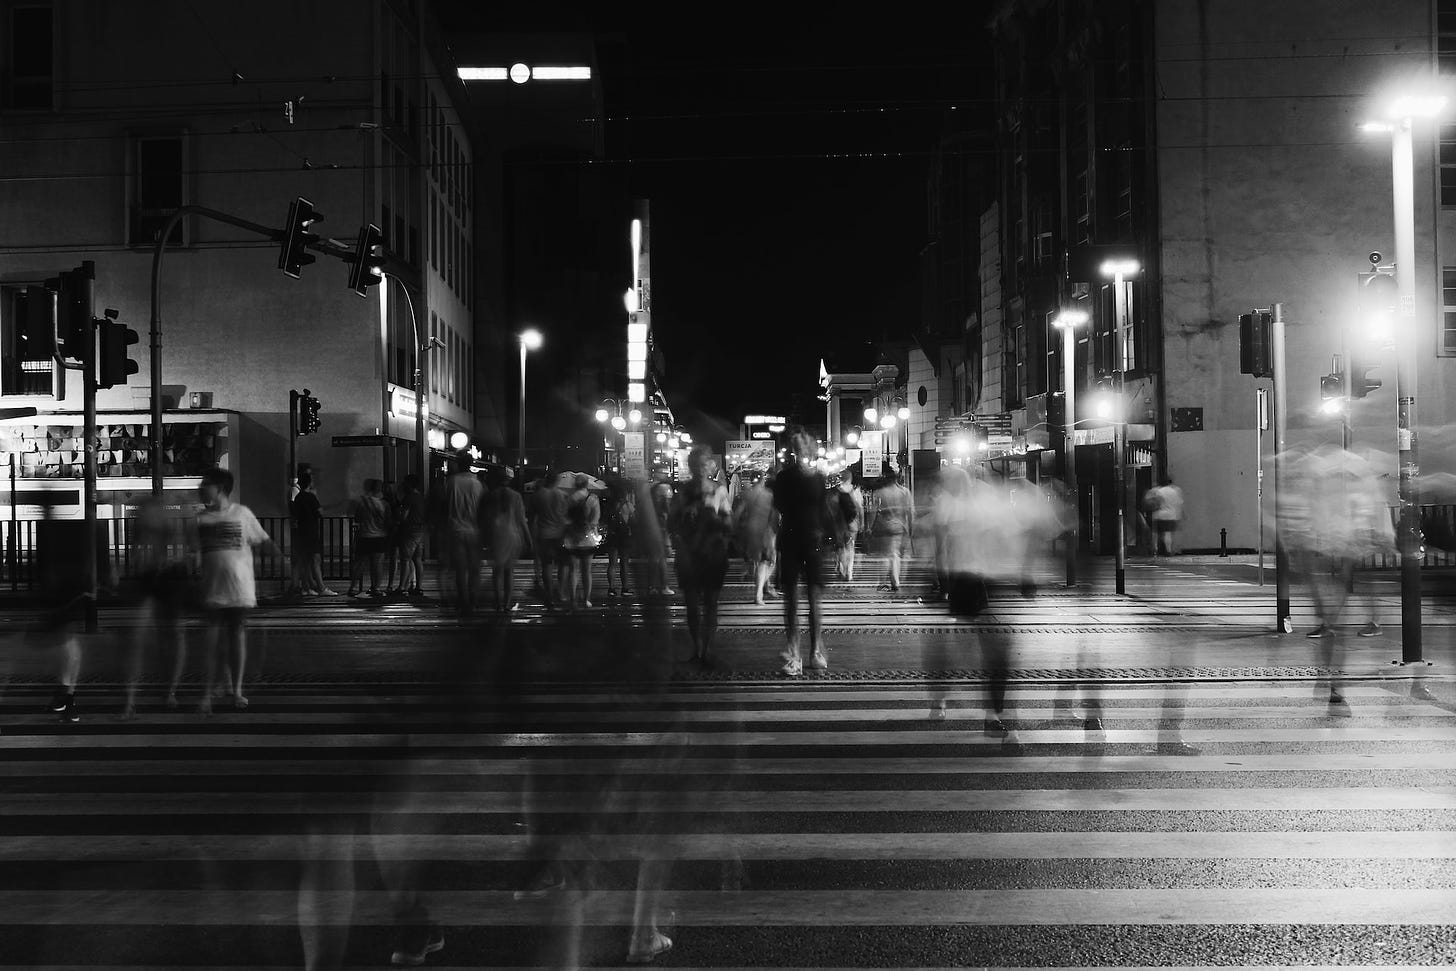 A timelapse black and white image of people in a city.